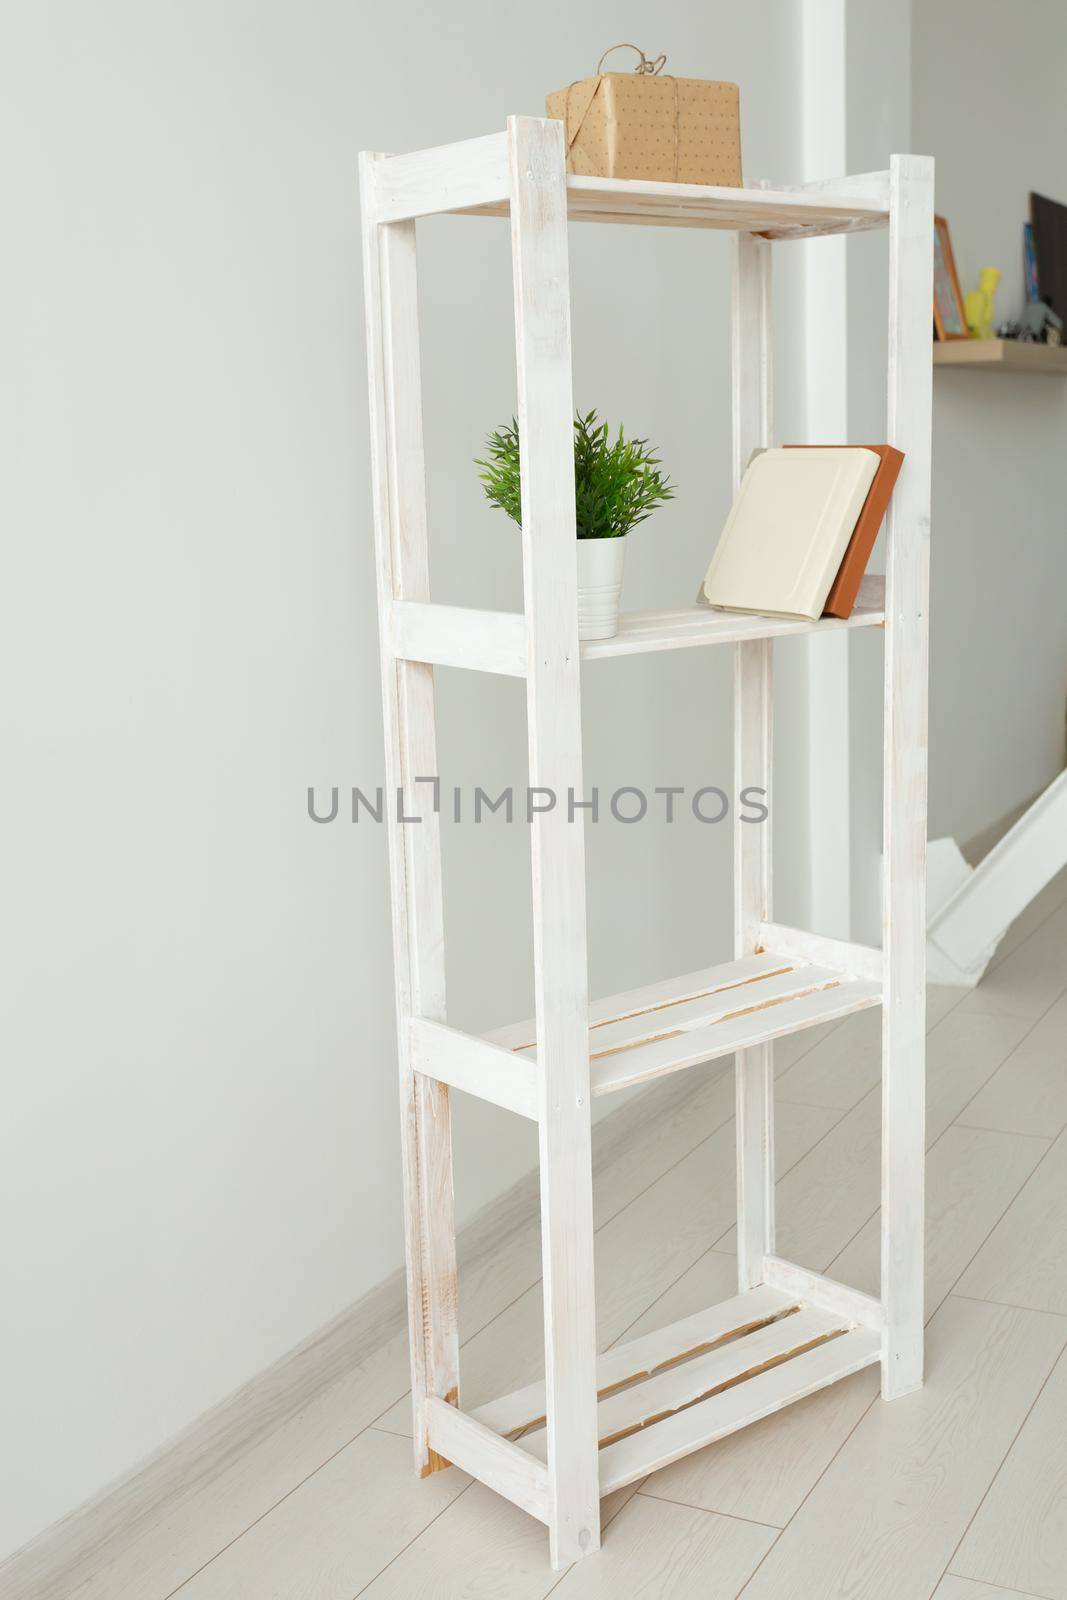 Rack with books and plant. Interior, minimalism and room decor. by Satura86